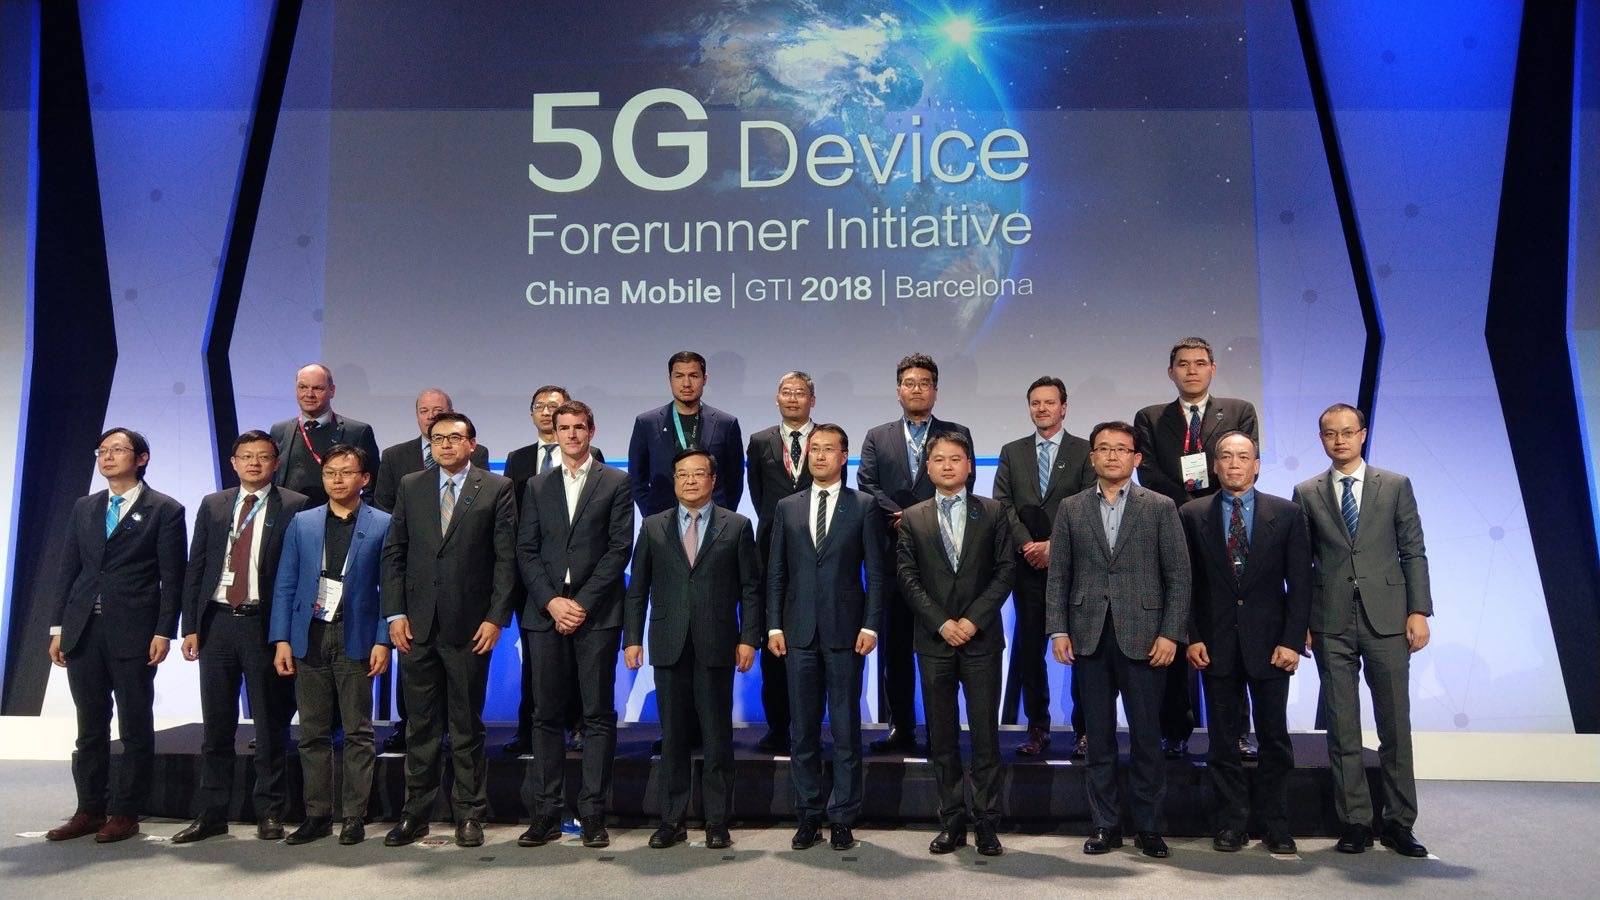 Vivo partners with China Mobile on “China Mobile 5G Device Forerunner Initiative” to drive 5G advancement